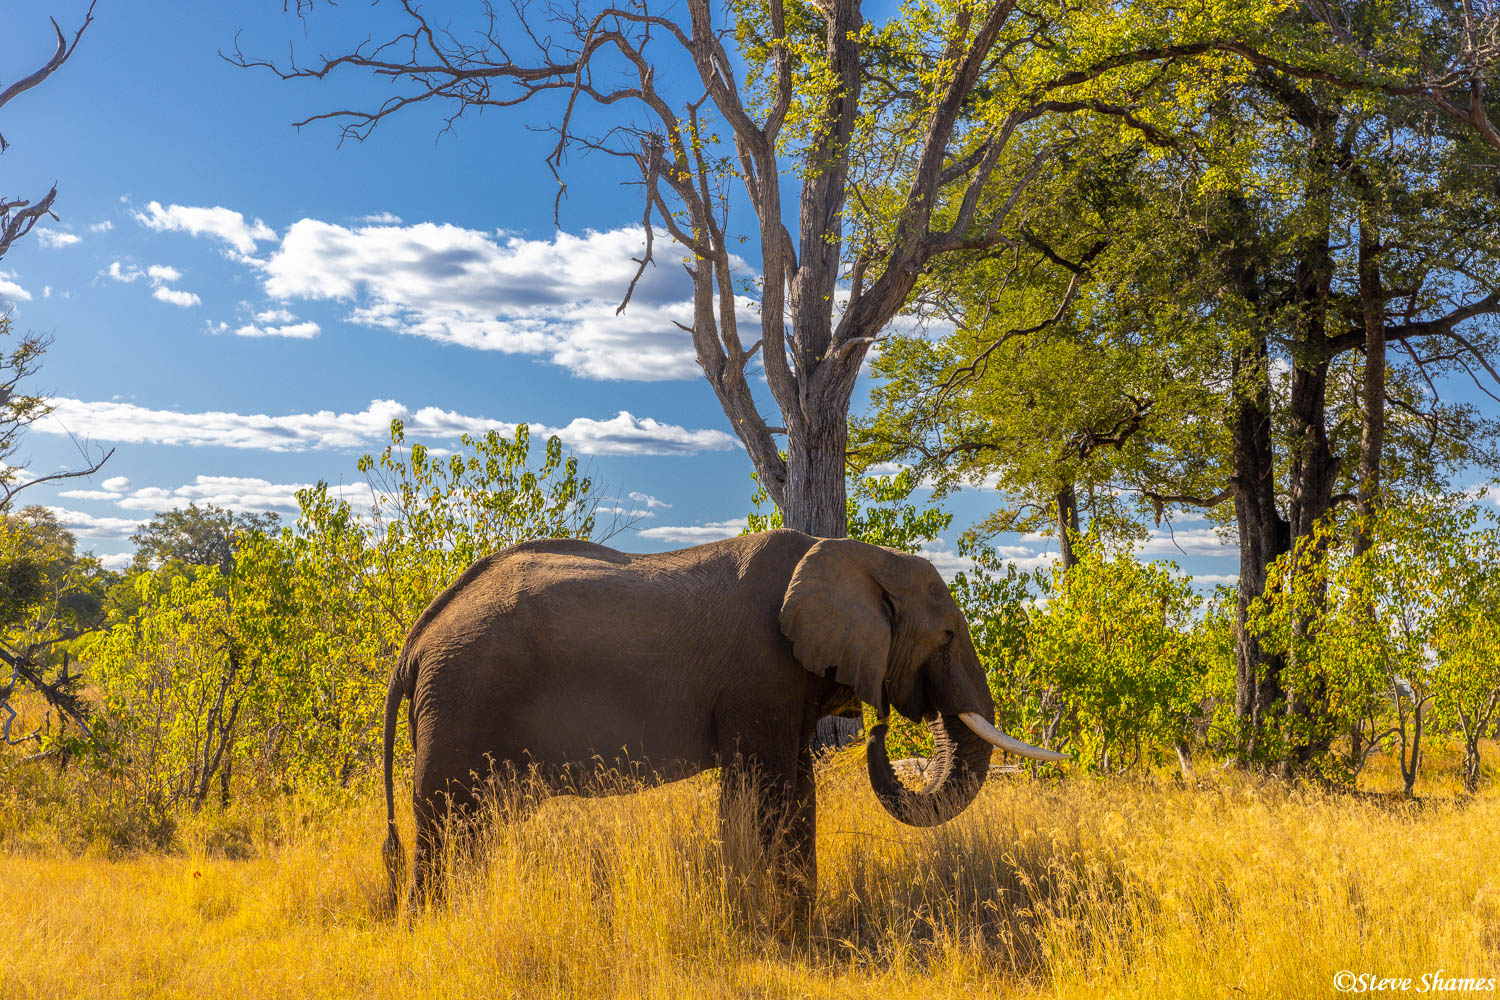 An elephant enjoying a nice day at Moremi Game Reserve in Botswana.